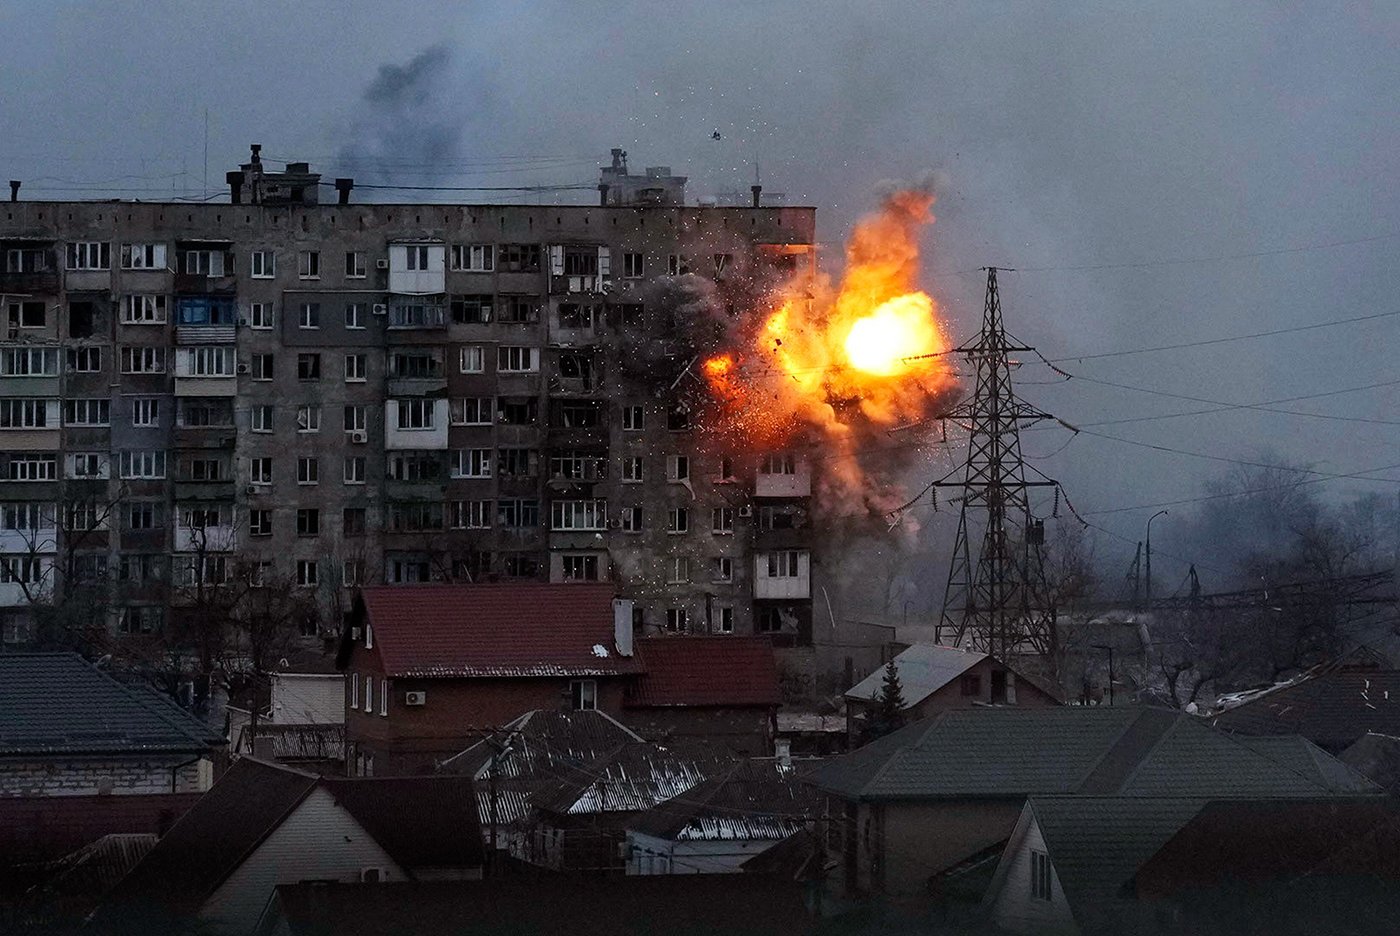 An explosion is seen in an apartment building after Russian's army tank fires in Mariupol, Ukraine, March 11, 2022. Still from FRONTLINE PBS and AP’s feature film “20 Days in Mariupol.” Credit: AP Photo/Evgeniy Maloletka